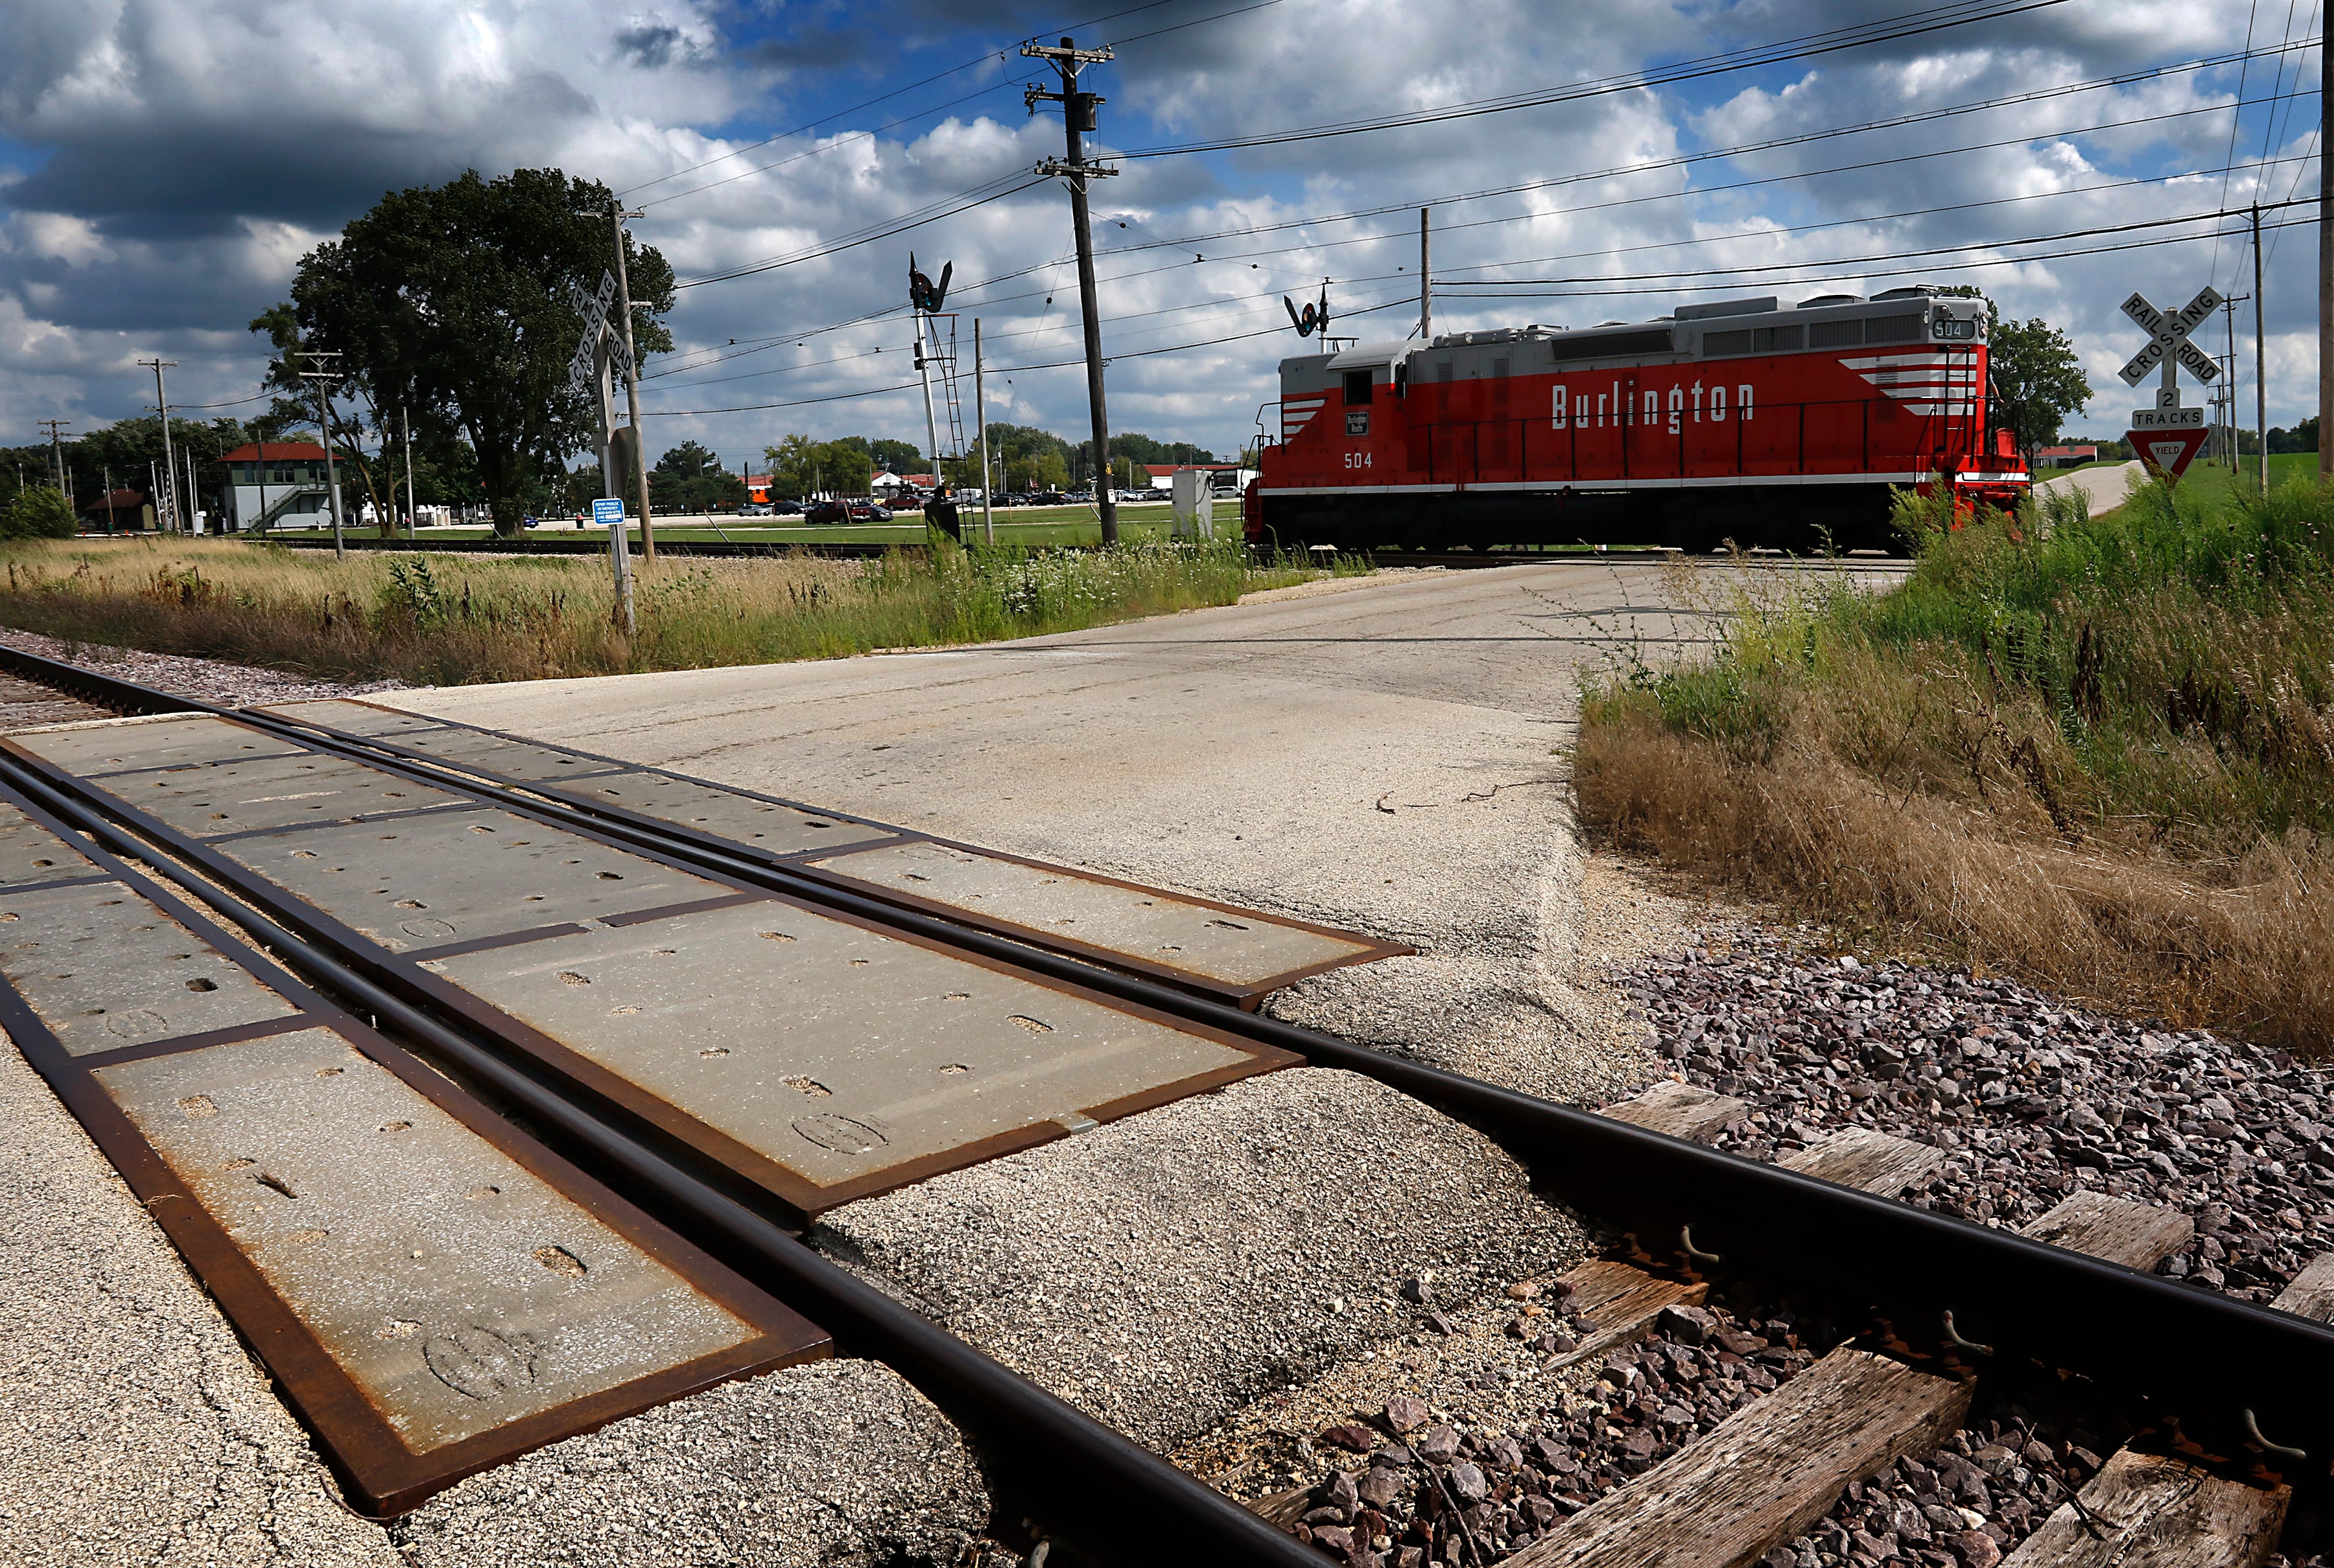 Proposed new Metra line to Rockford would run past Illinois Railway Museum